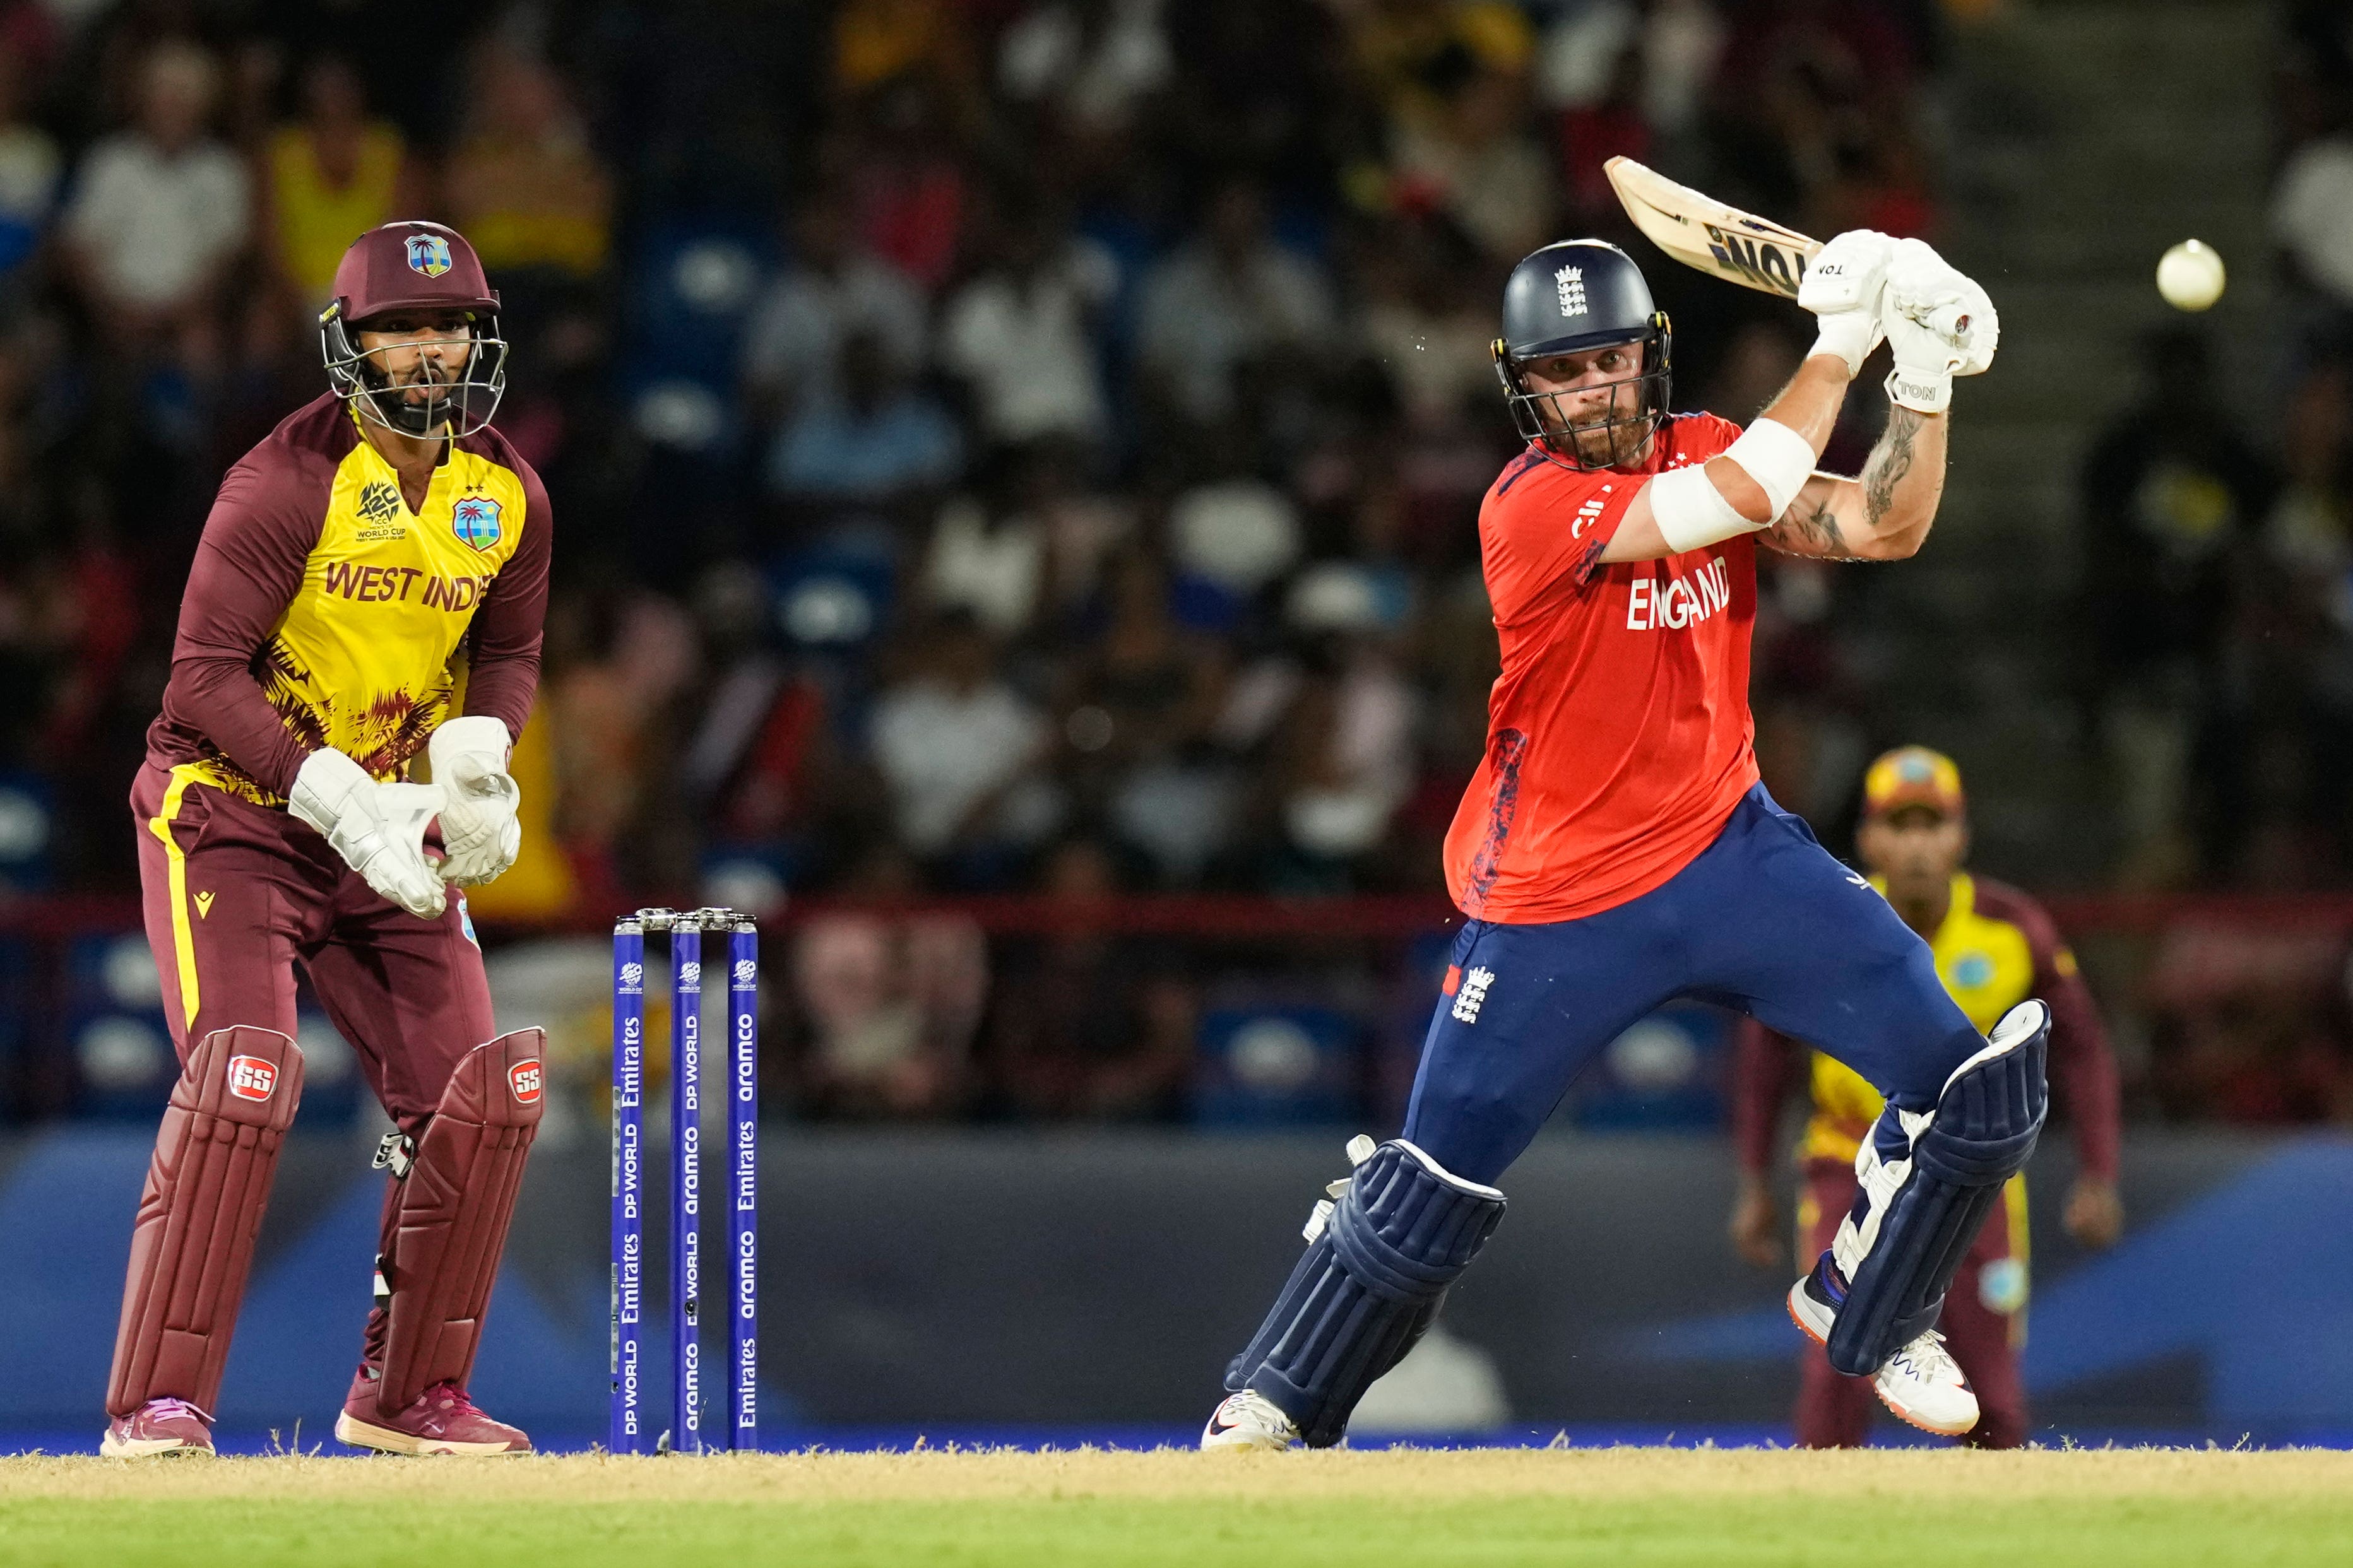 England’s Phil Salt, right, bats during the men’s T20 World Cup match against the West Indies (Ramon Espinosa/AP)